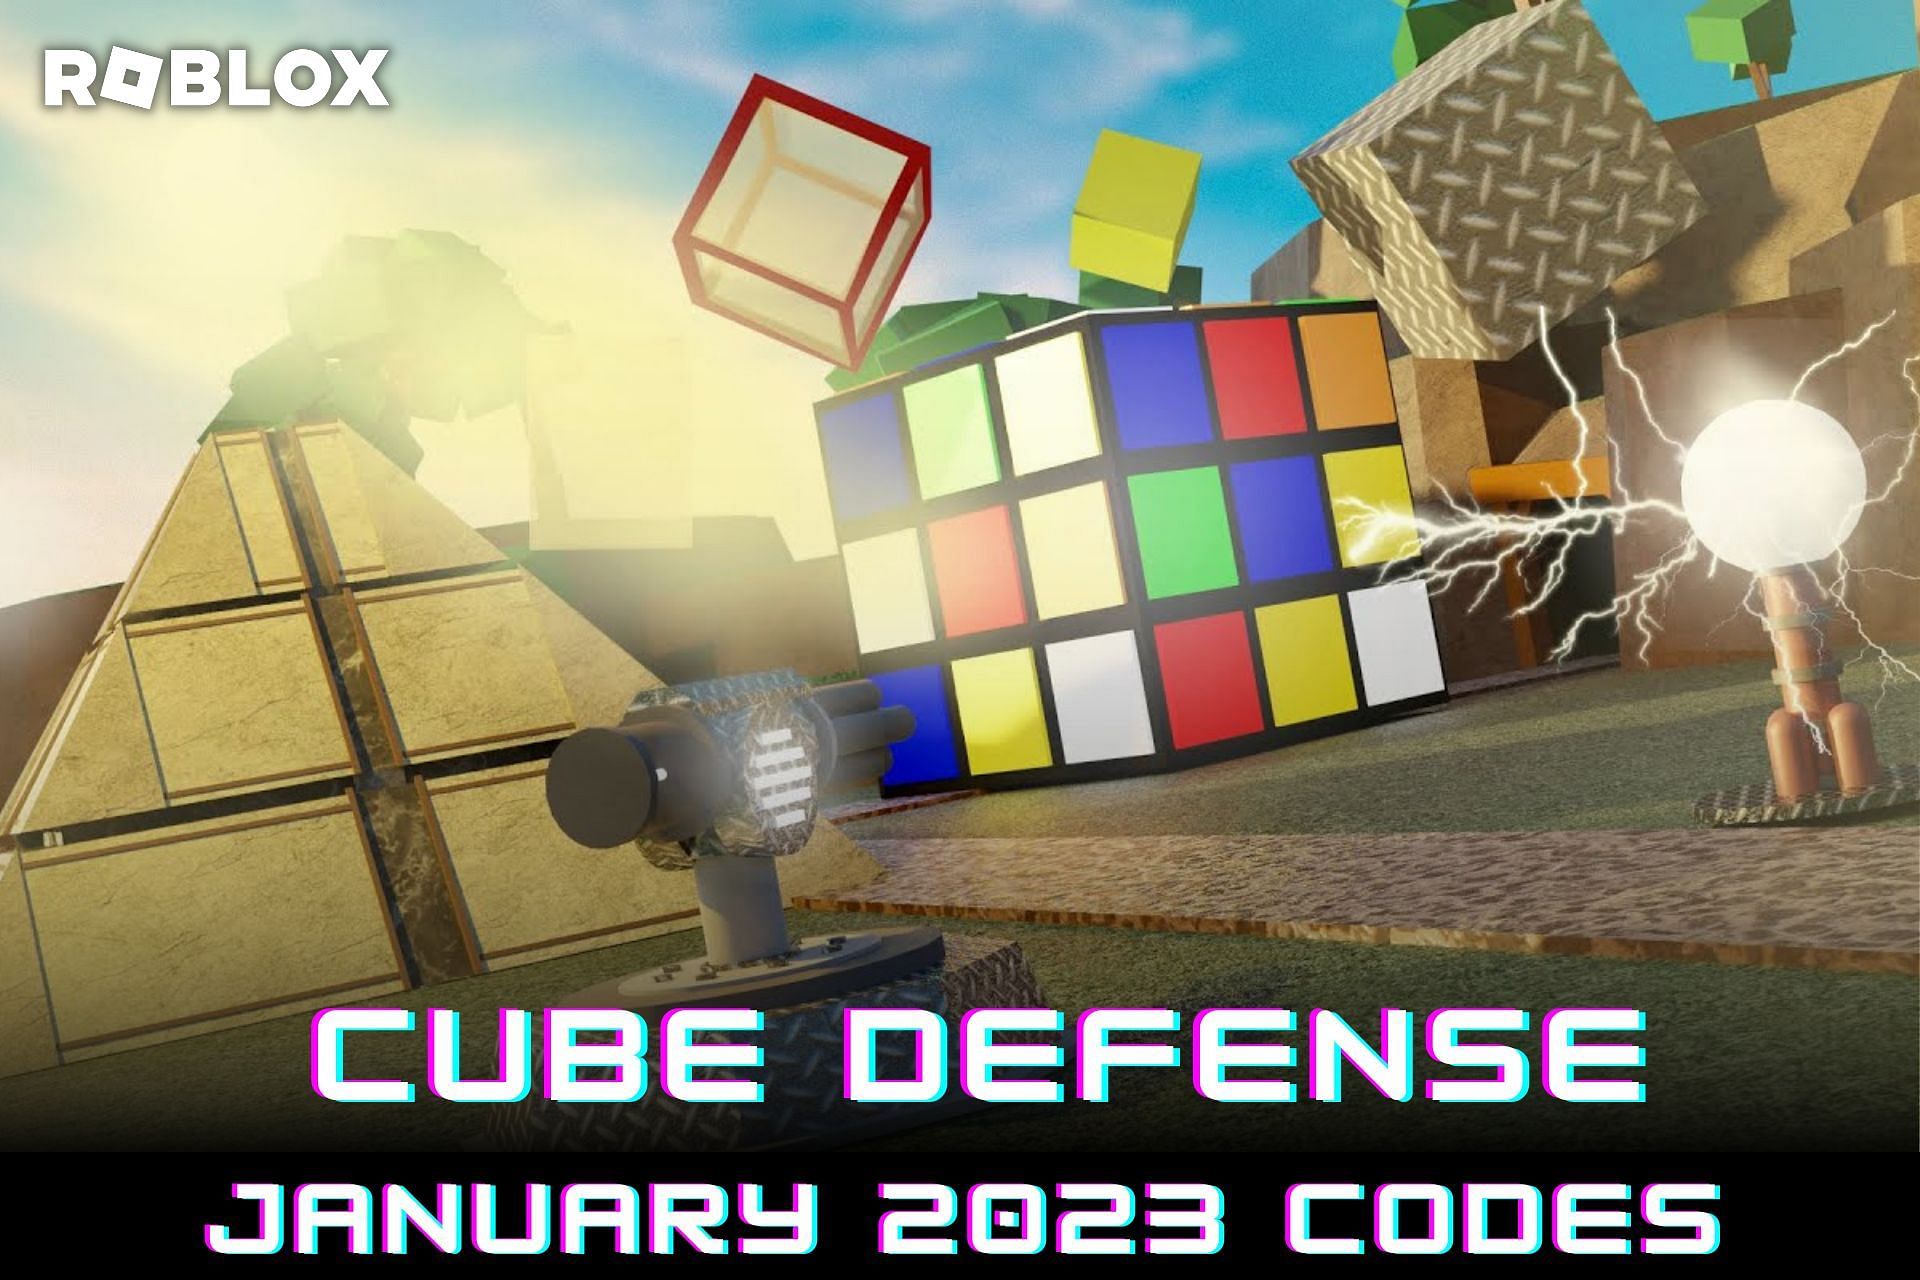 Roblox promo codes for October 2023: How to redeem Roblox promo